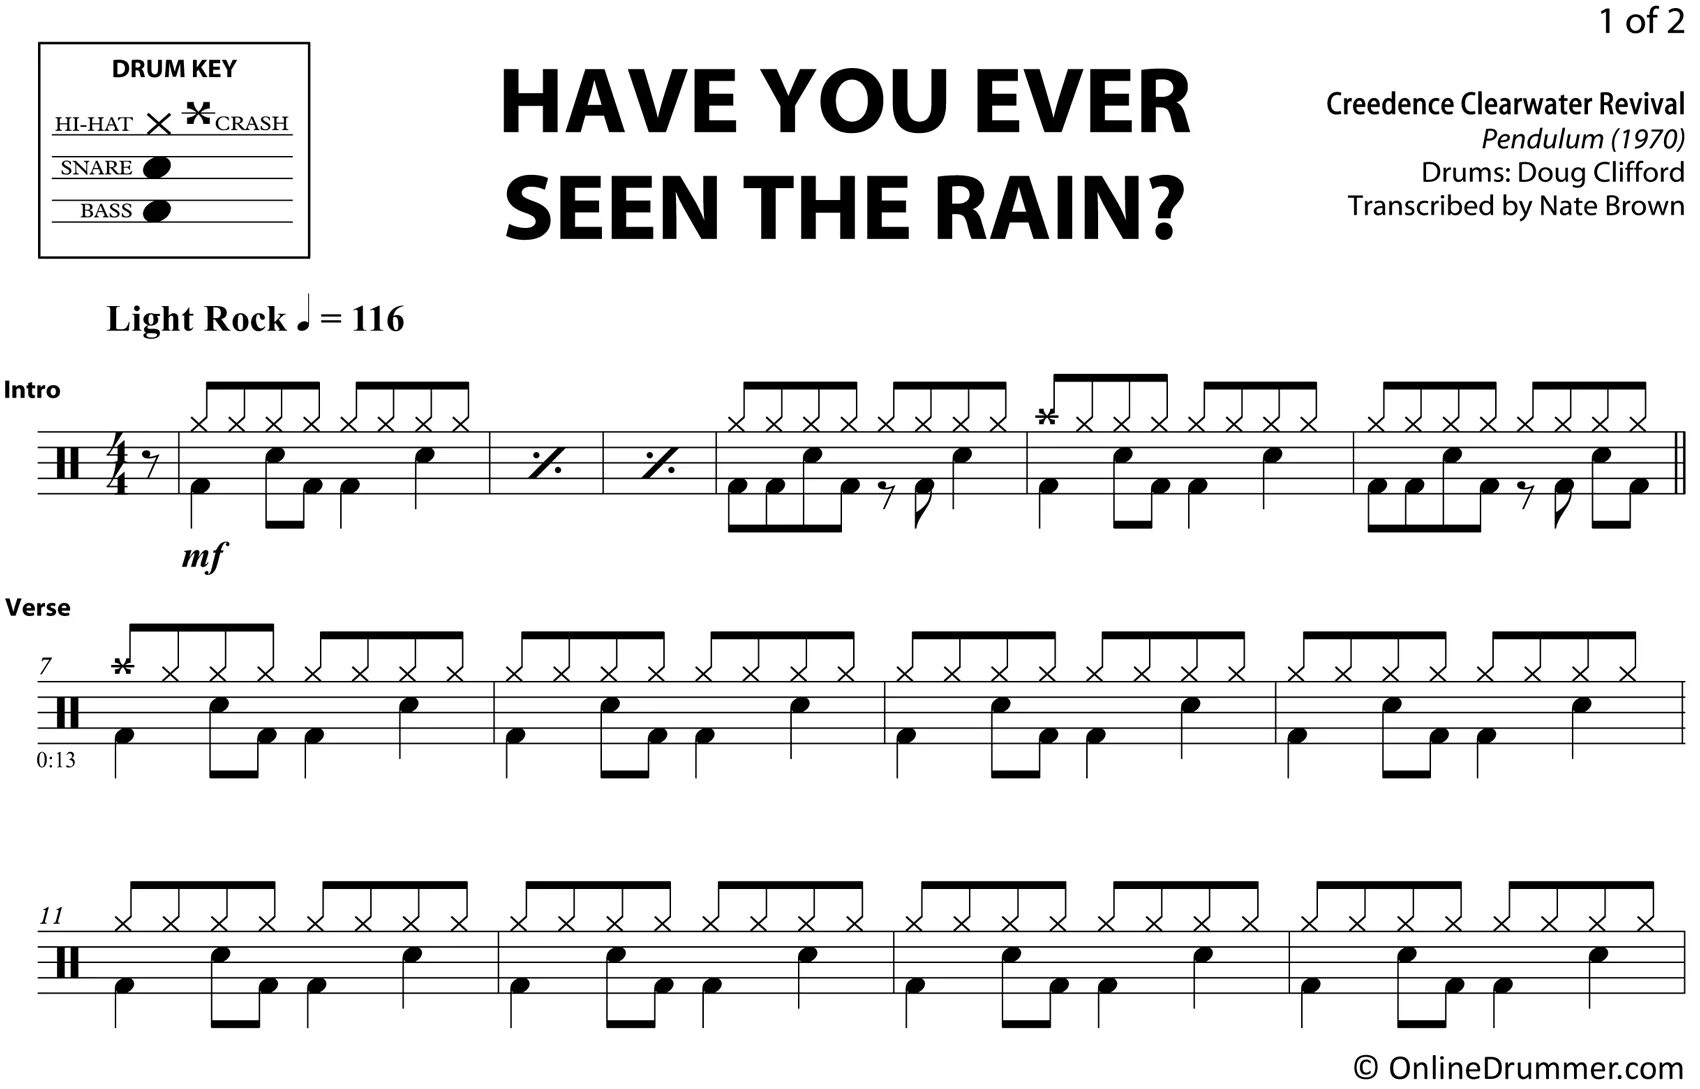 See rain перевод. Have you ever seen the Rain? От Creedence Clearwater Revival. Creedence Clearwater Revival - have you ever seen the Rain (1970). Have you ever seen the Rain Криденс. Have you ever seen the Rain Ноты.